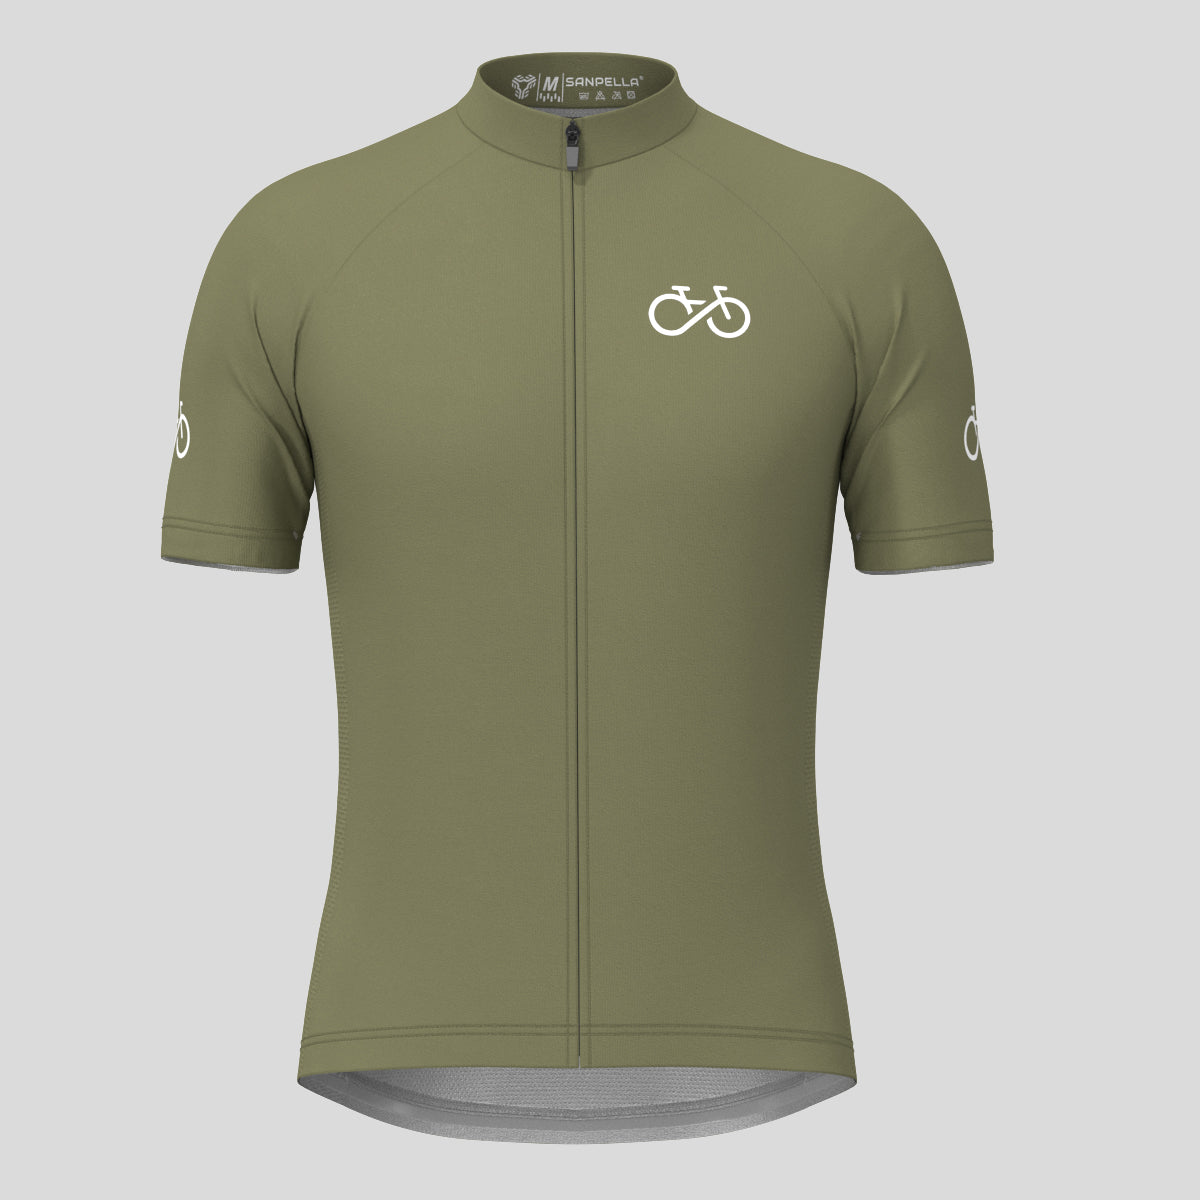 Ride Forever Men's Cycling Jersey -Olive